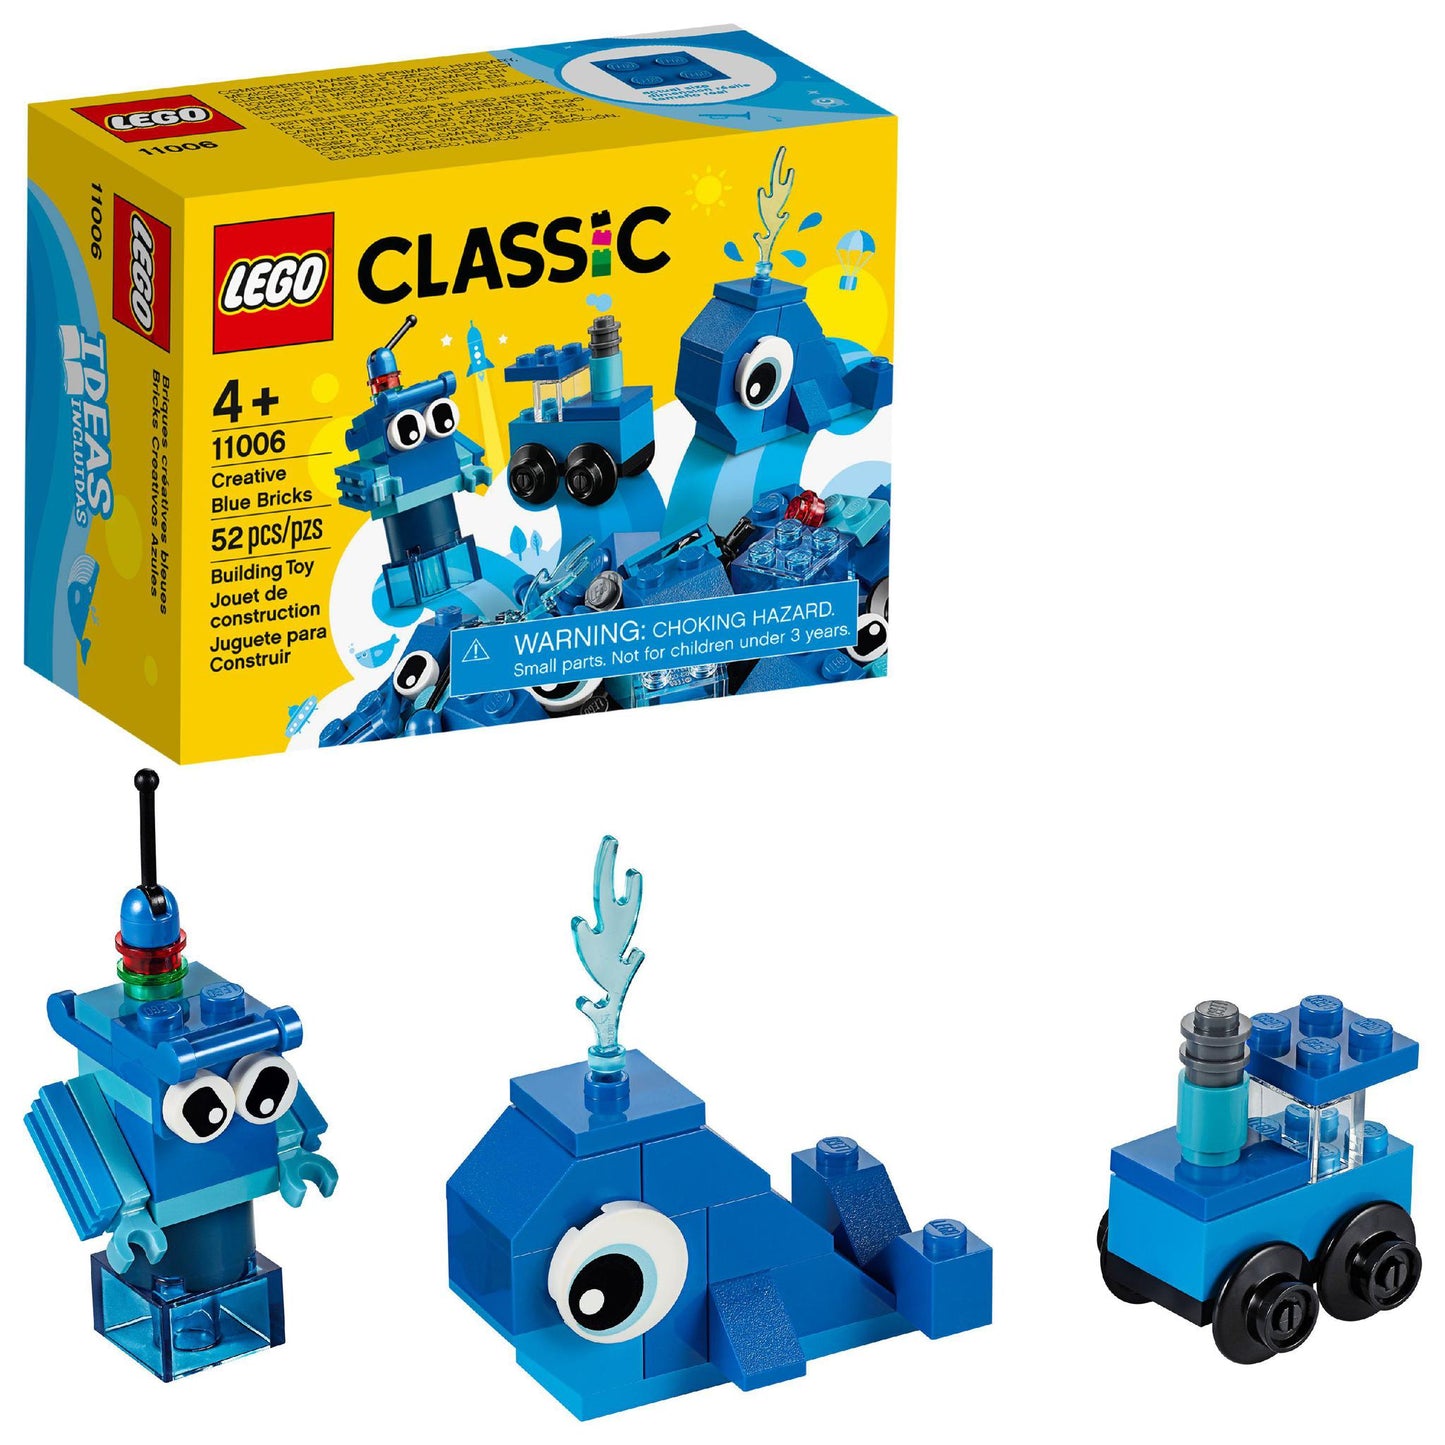 LEGO Classic Creative Blue Bricks 11006 Kids’ Building Toy with Blue Bricks to Inspire Imaginative Play, New 2020